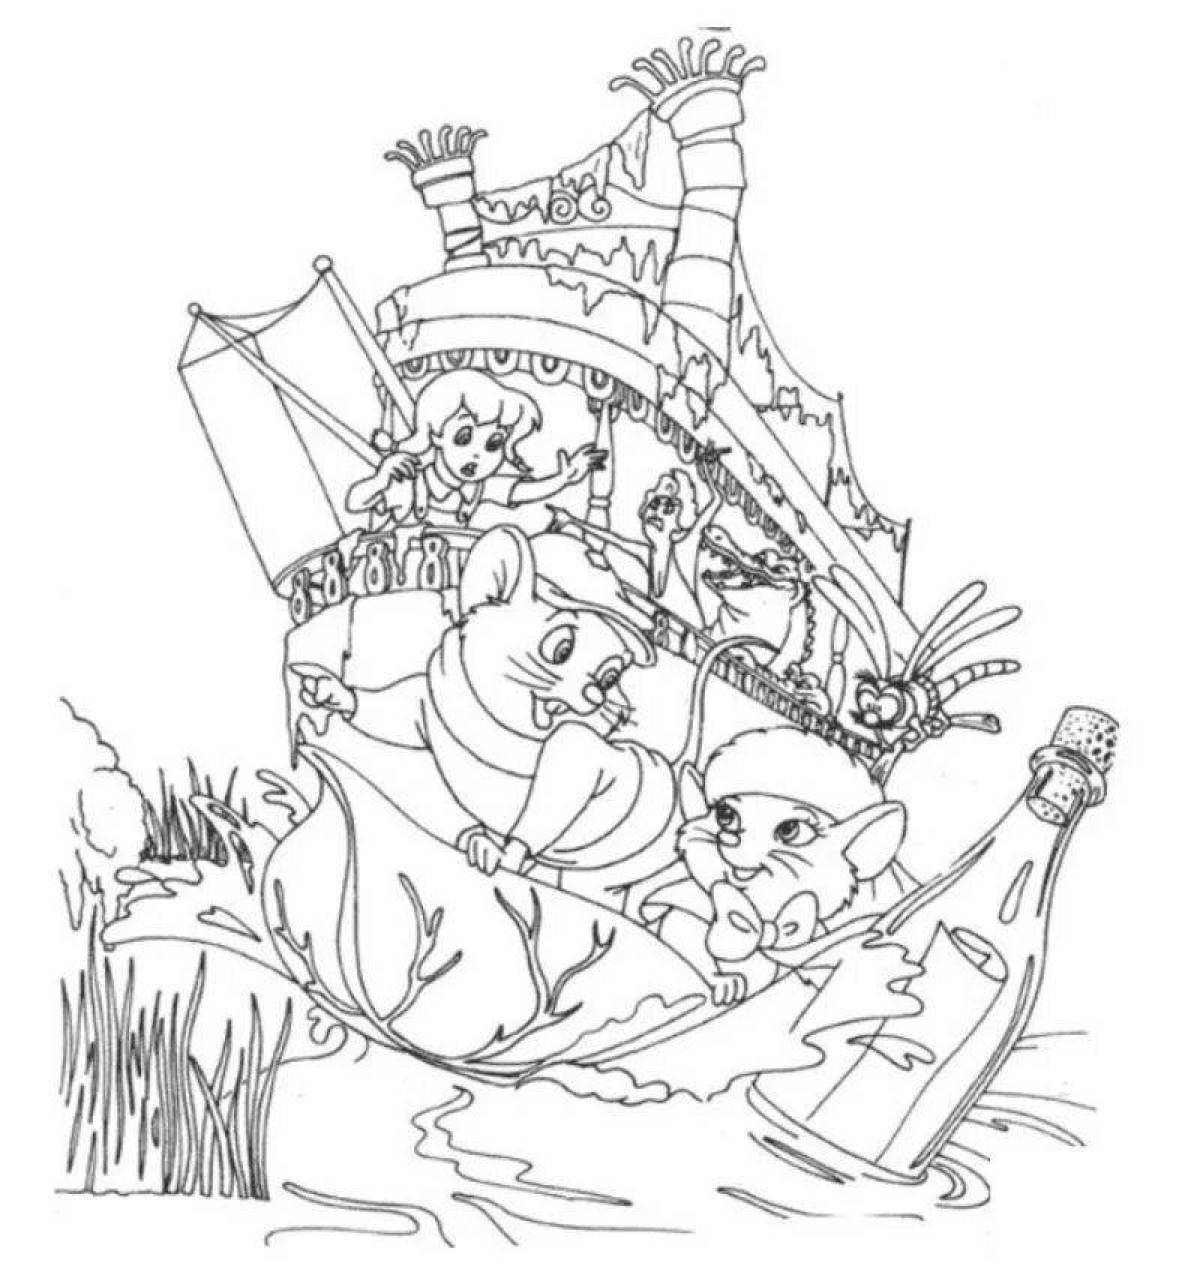 Attracting bianchi coloring page